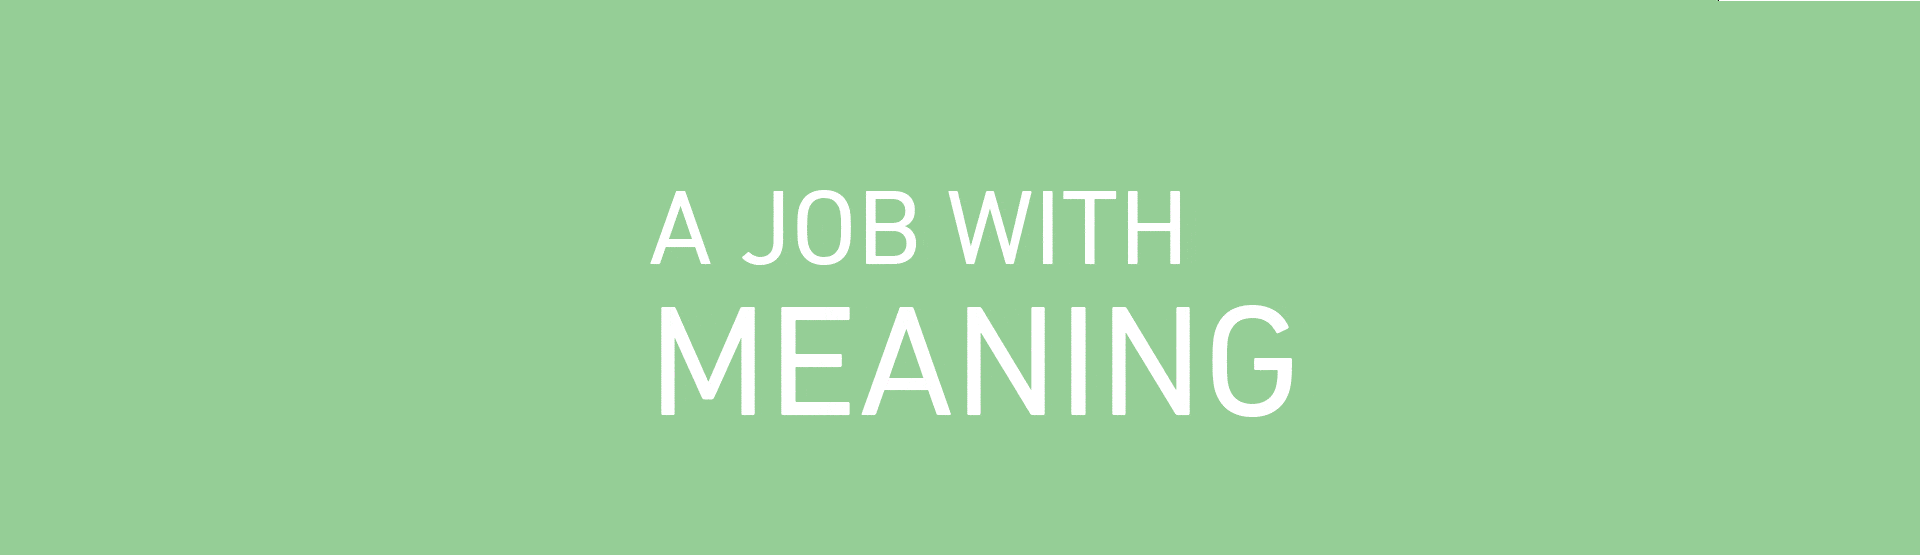 A job with meaning